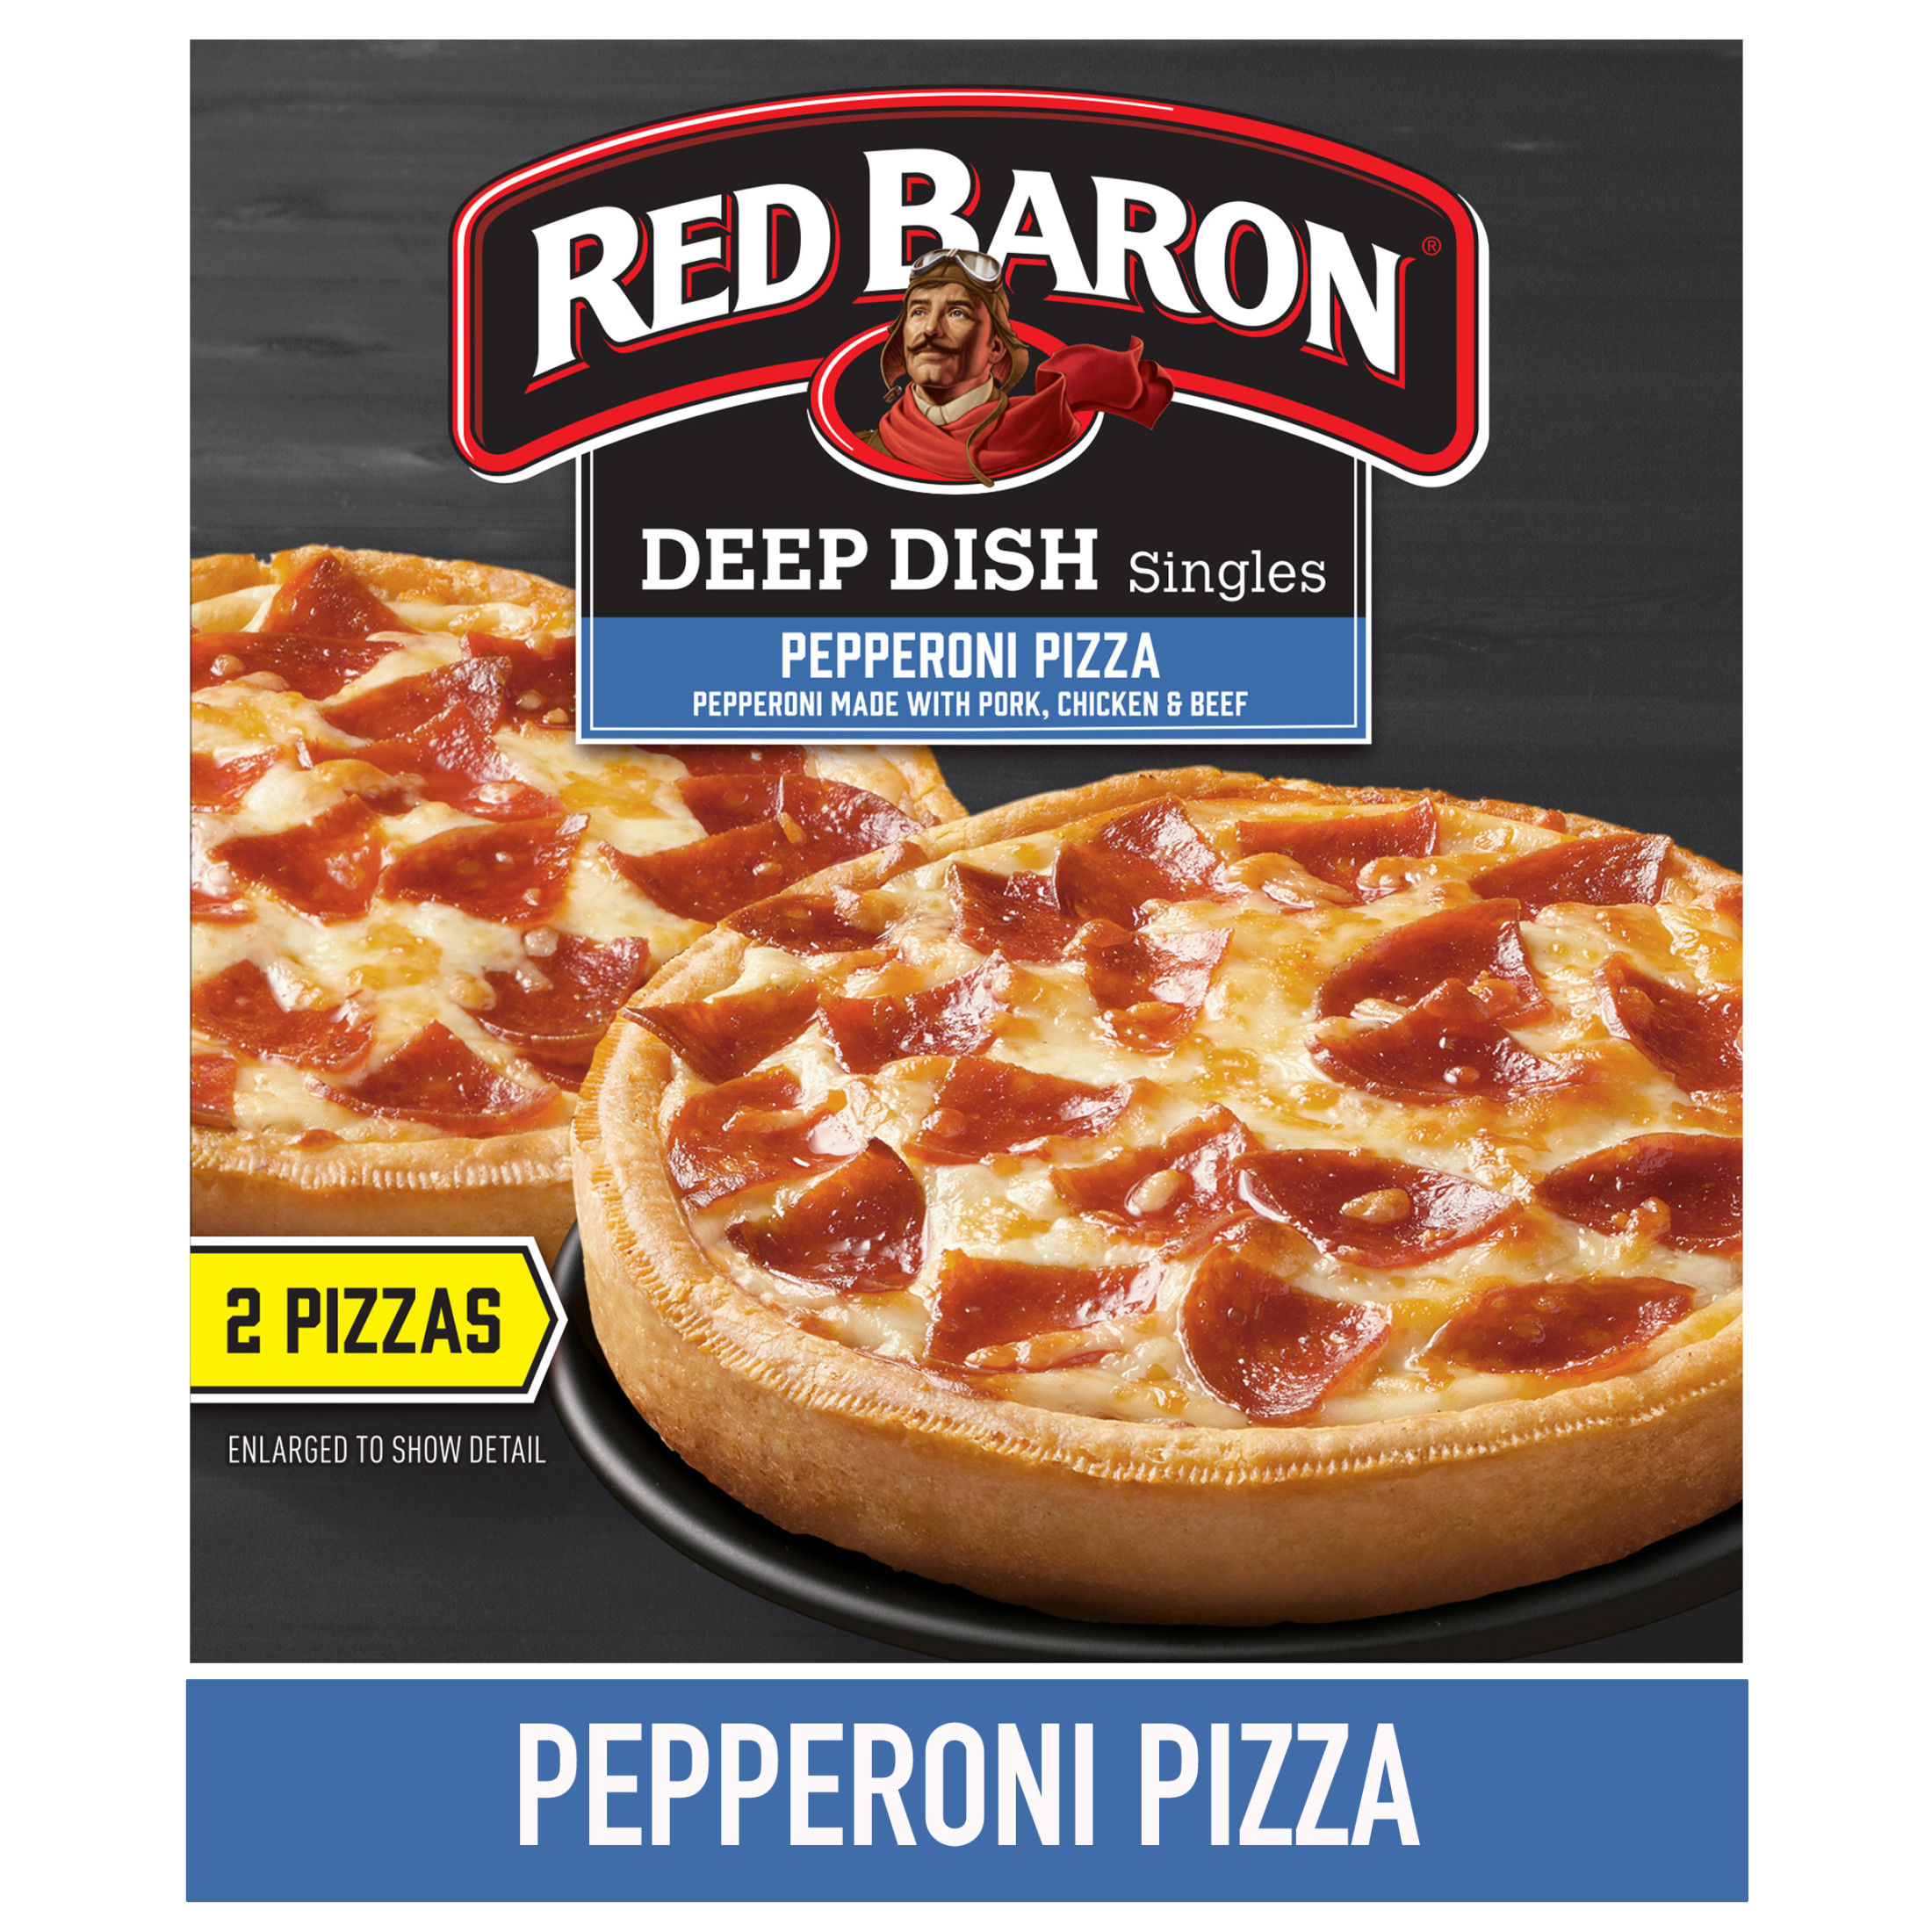 Red Baron Frozen Pizza Deep Dish Singles Pepperoni, 11.2 oz - image 3 of 14